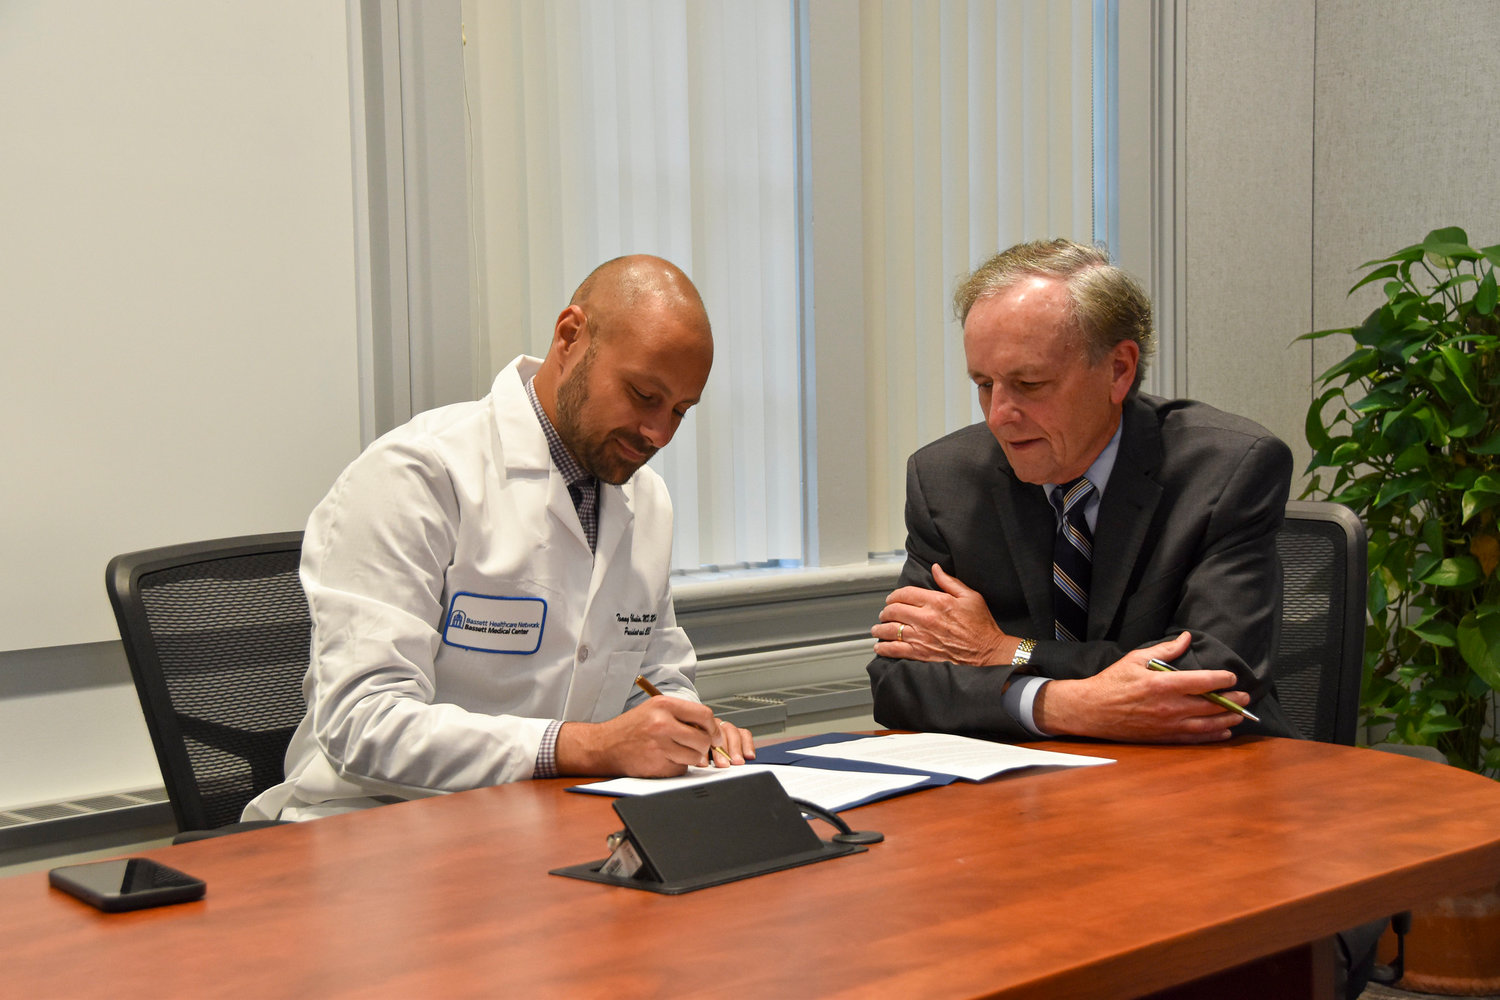 Dr. Tommy Ibrahim, Bassett Healthcare Network’s president and chief executive officer, left, and Doug Hastings, Bassett Healthcare Network’s Board of Directors chair, talk while Ibrahim signs a contract extension to continue to lead the network through 2029.